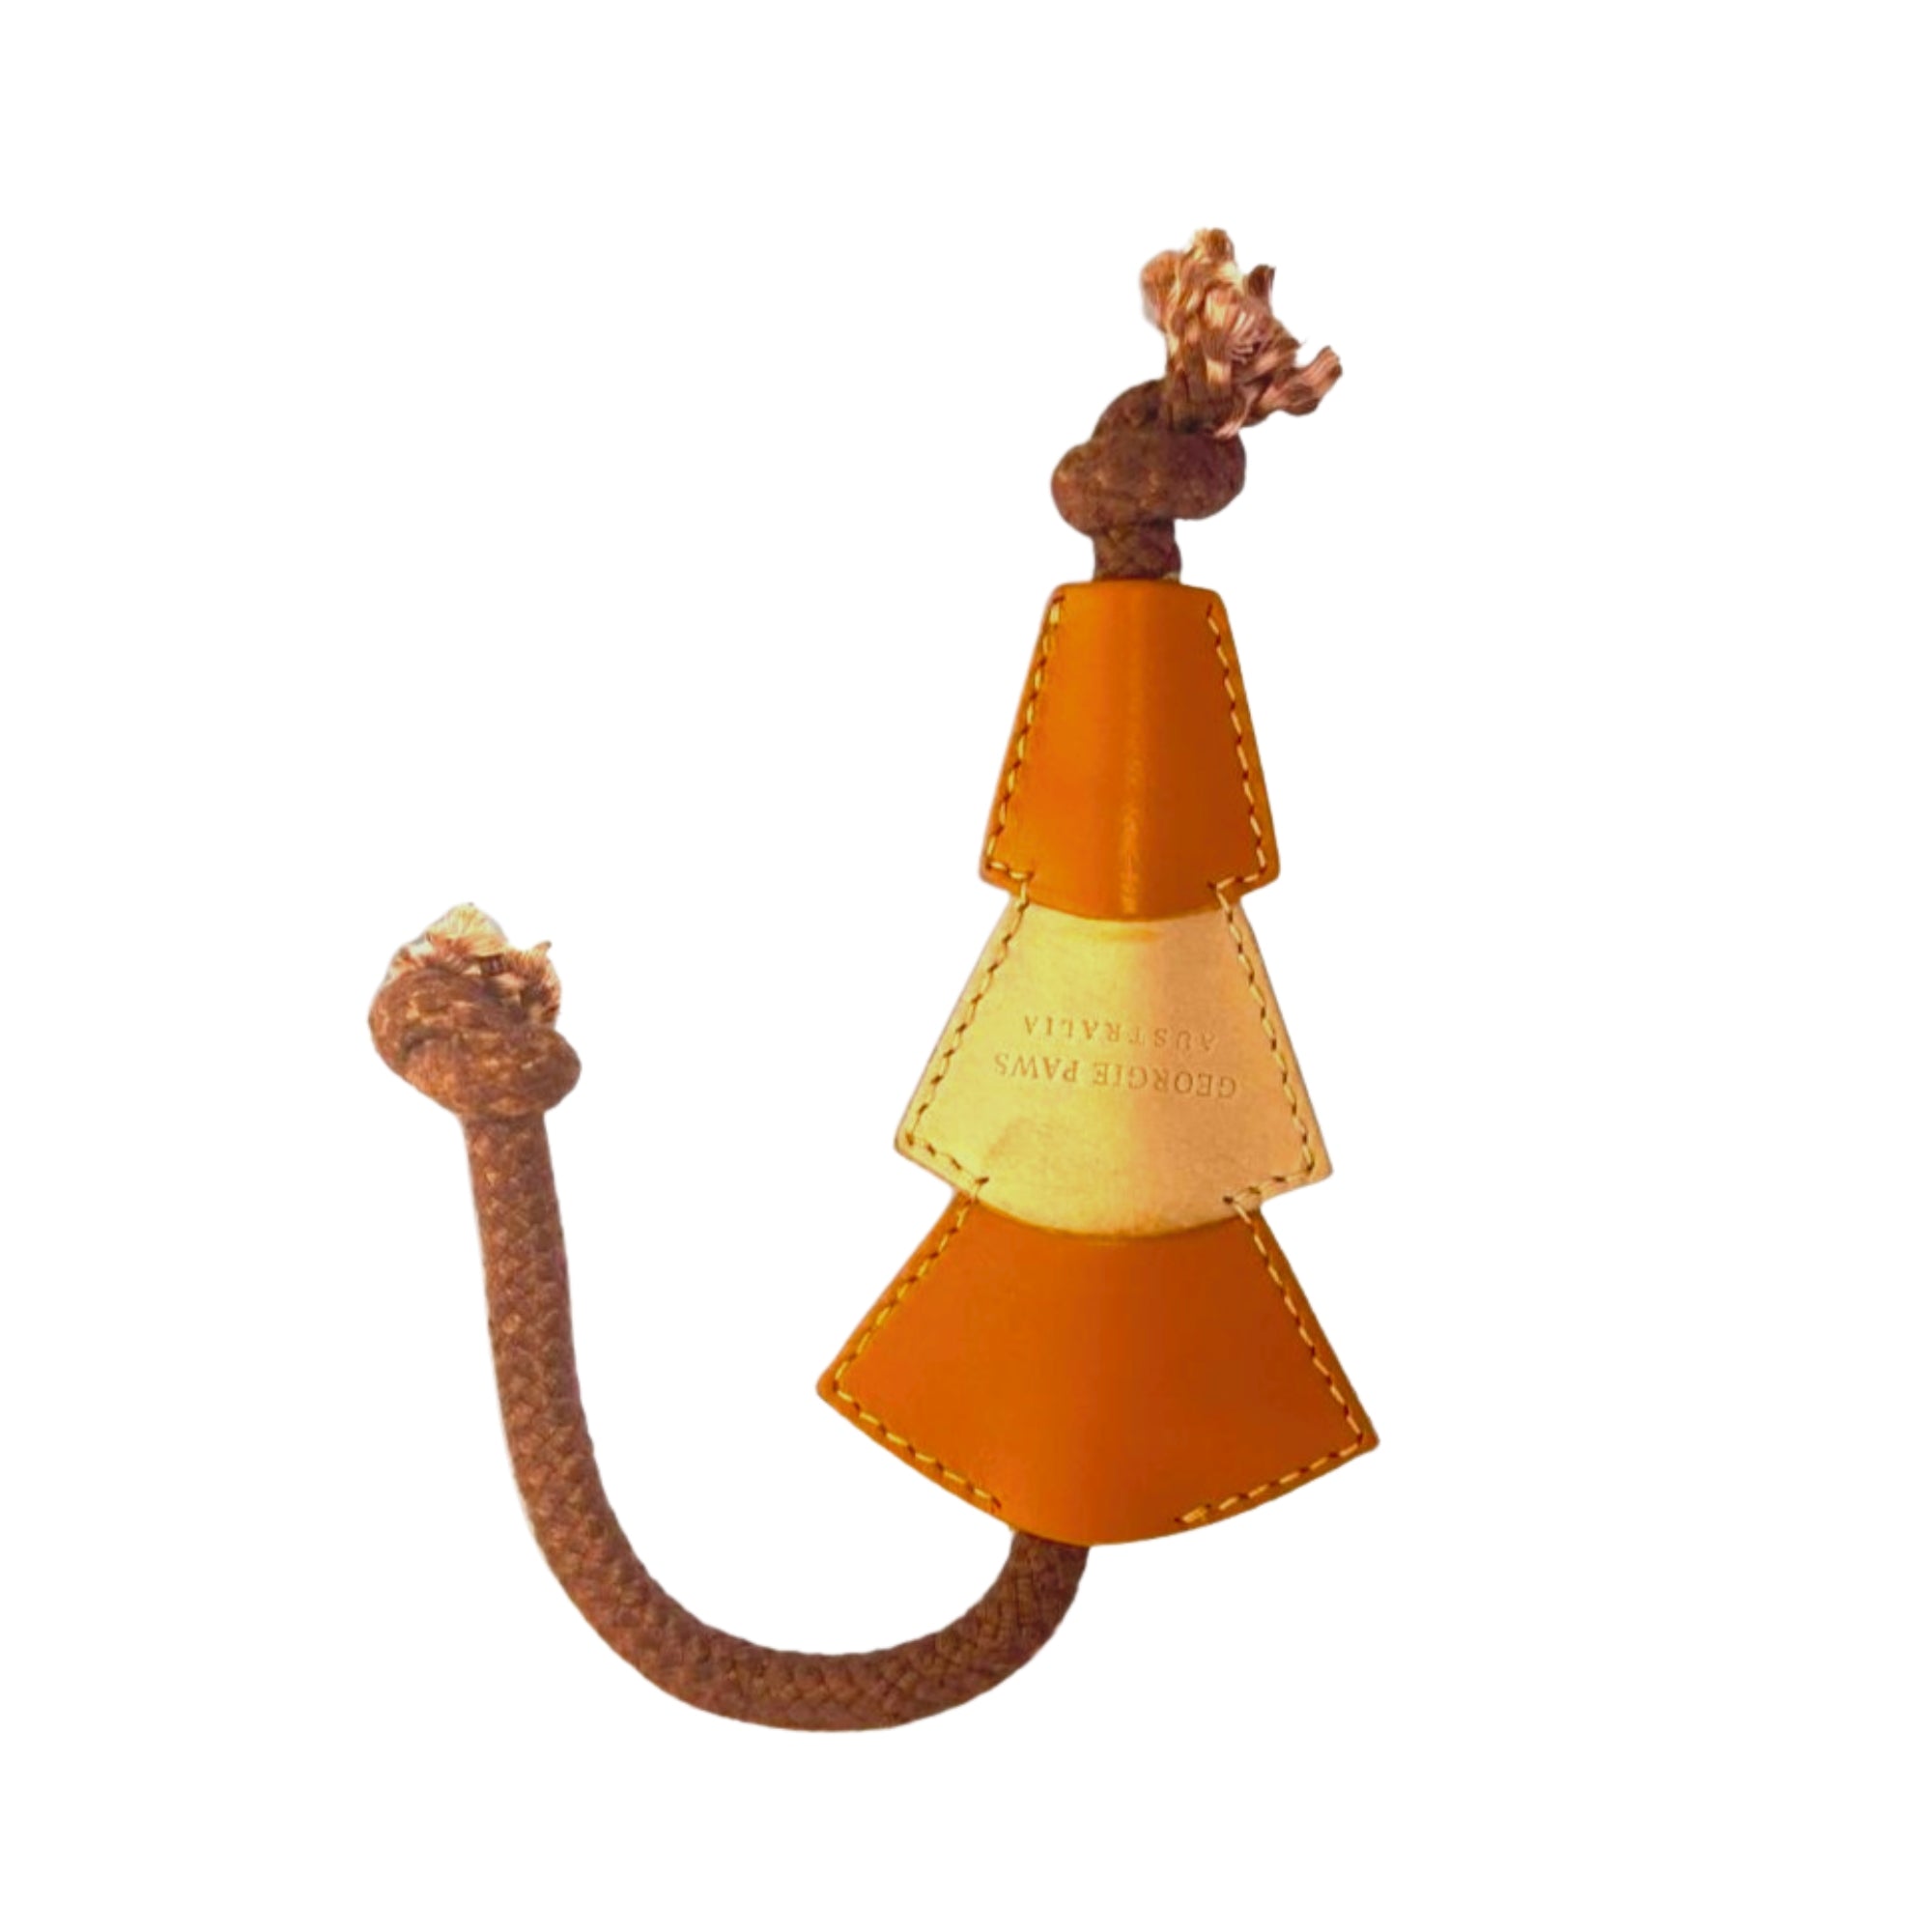 A whimsical coat hook shaped like an upside-down Bush Christmas Chew Toy - ochre, featuring a textured Veg-Tanned Buffalo Leather handle and three golden orange, triangular sections with embossed letters. A decorative lion's head tops the bottle, adding a unique accent. from Georgie Paws